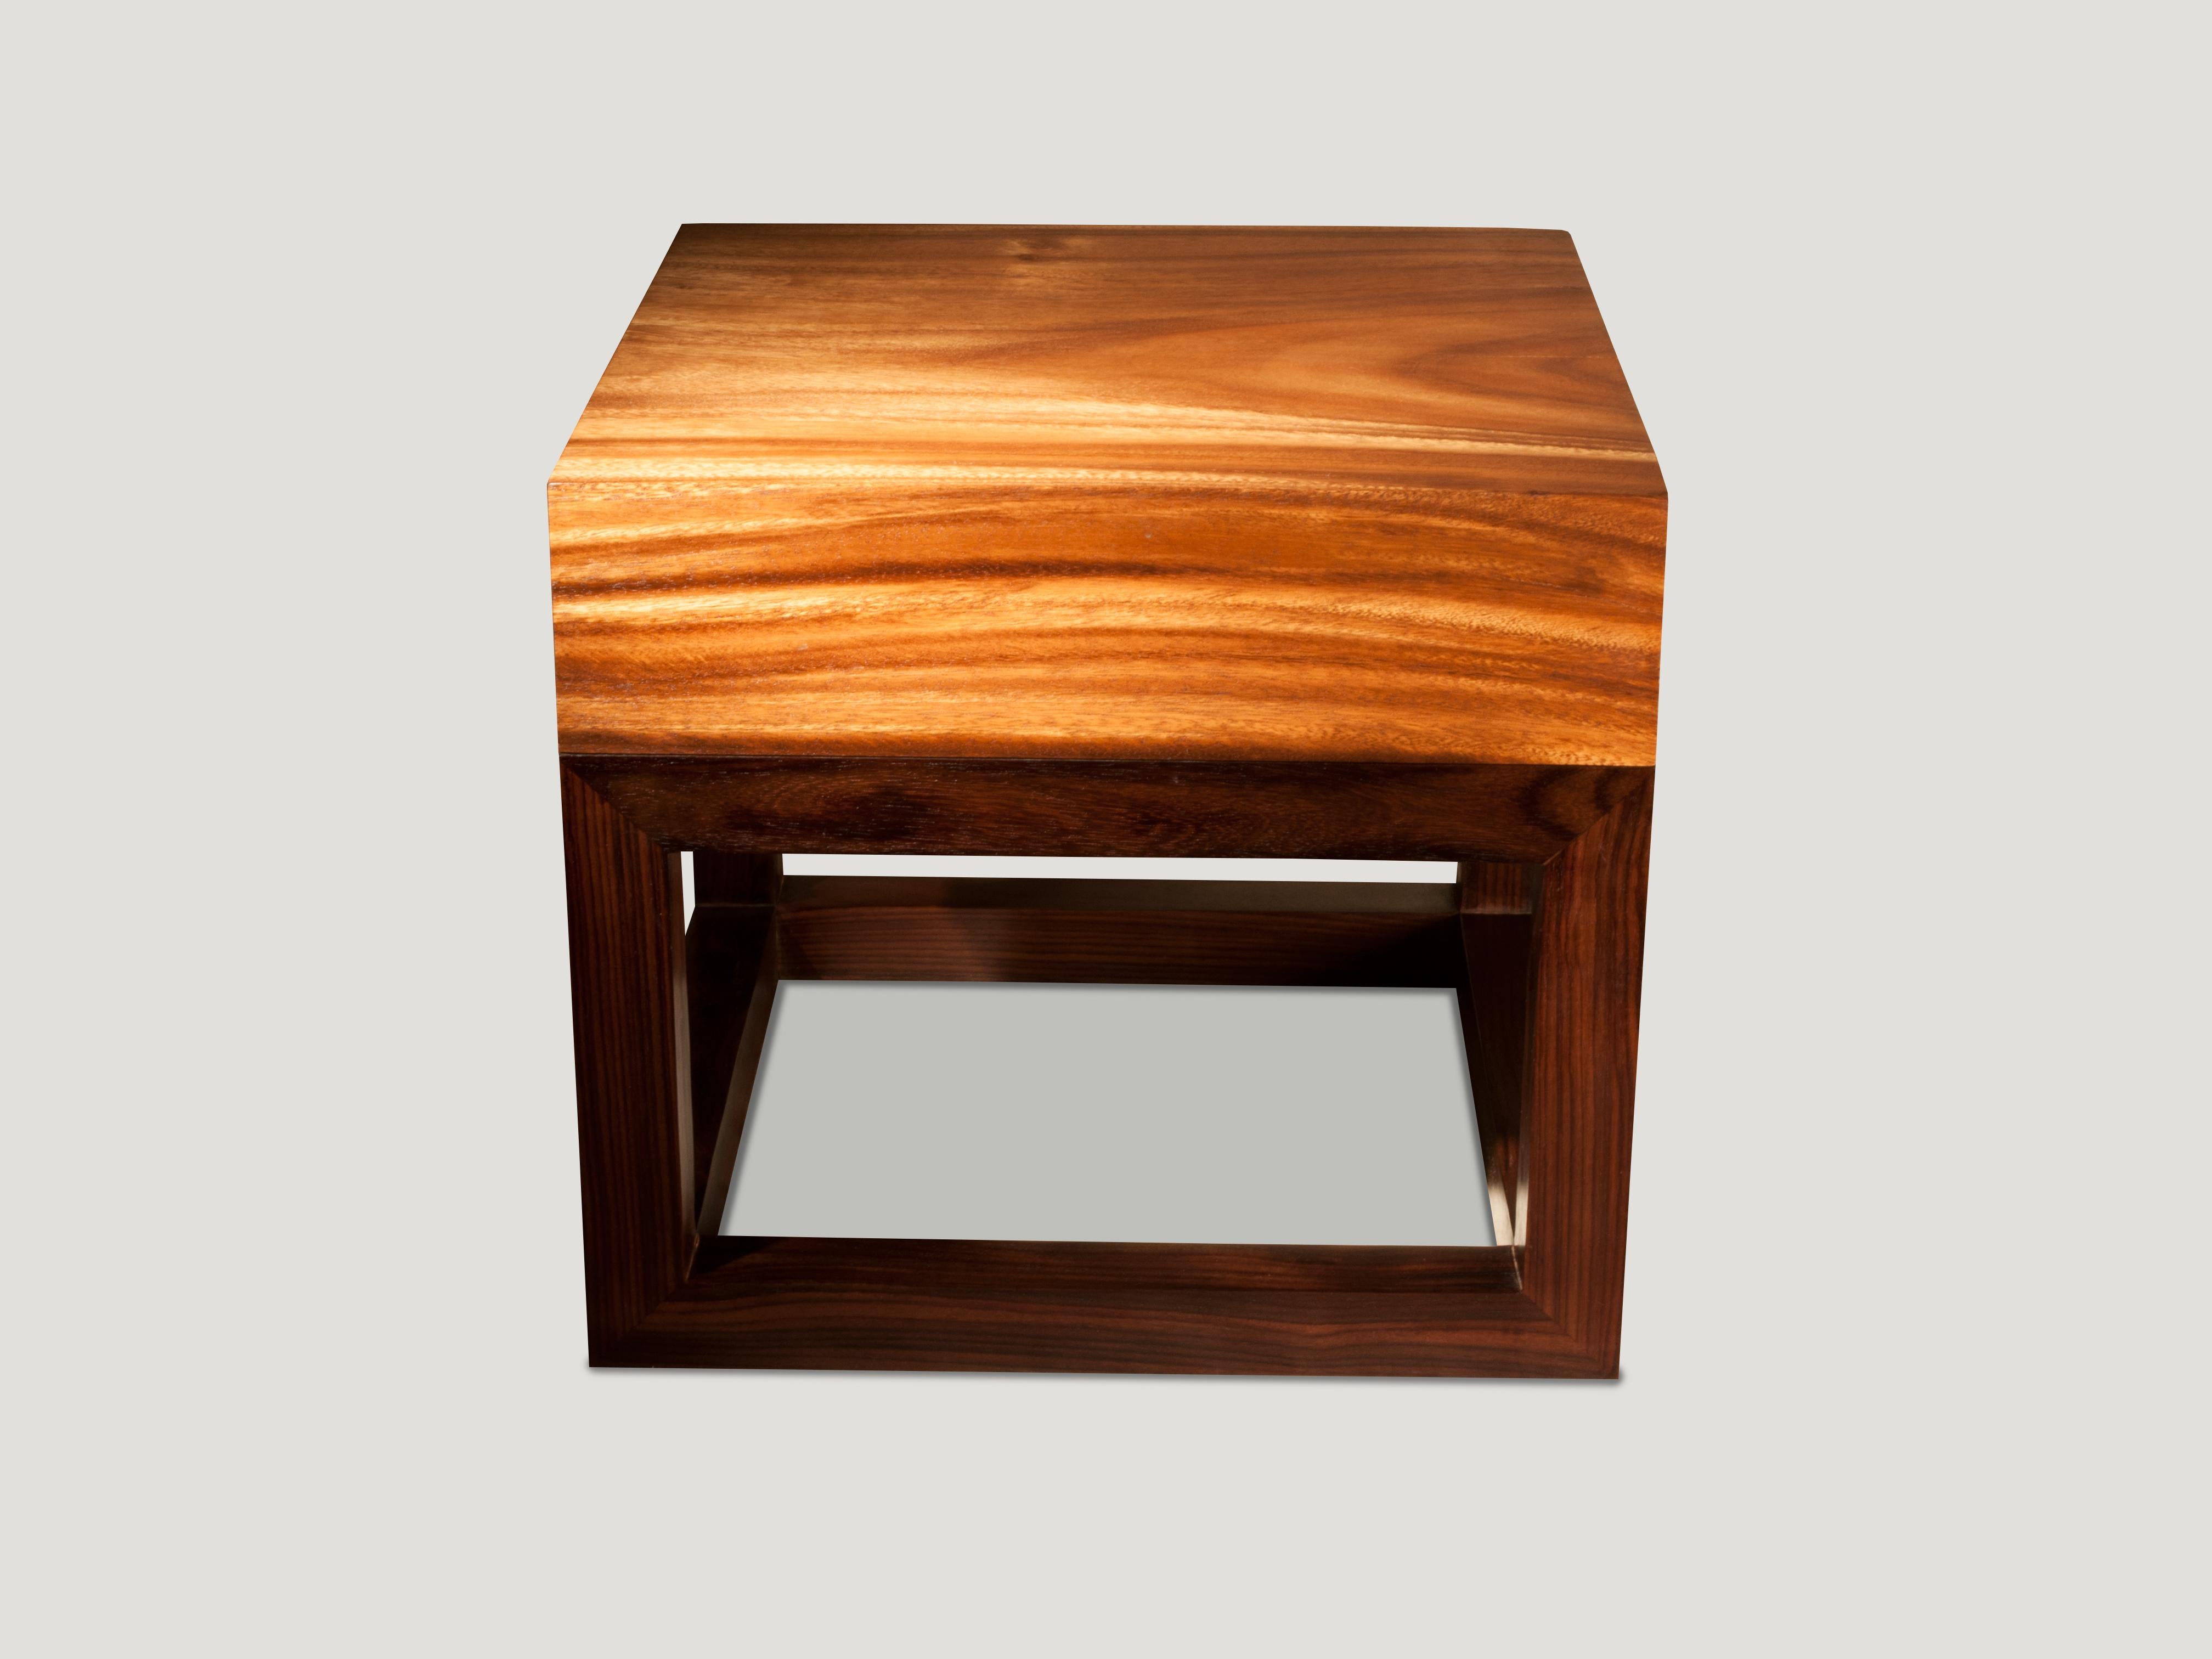 Solid 5? thick natural suar wood top with a walnut stain teak base. Beautiful natural contrasting colors in this impressive reclaimed suar wood top.

Andrianna Shamaris. The Leader In Modern Organic Design.